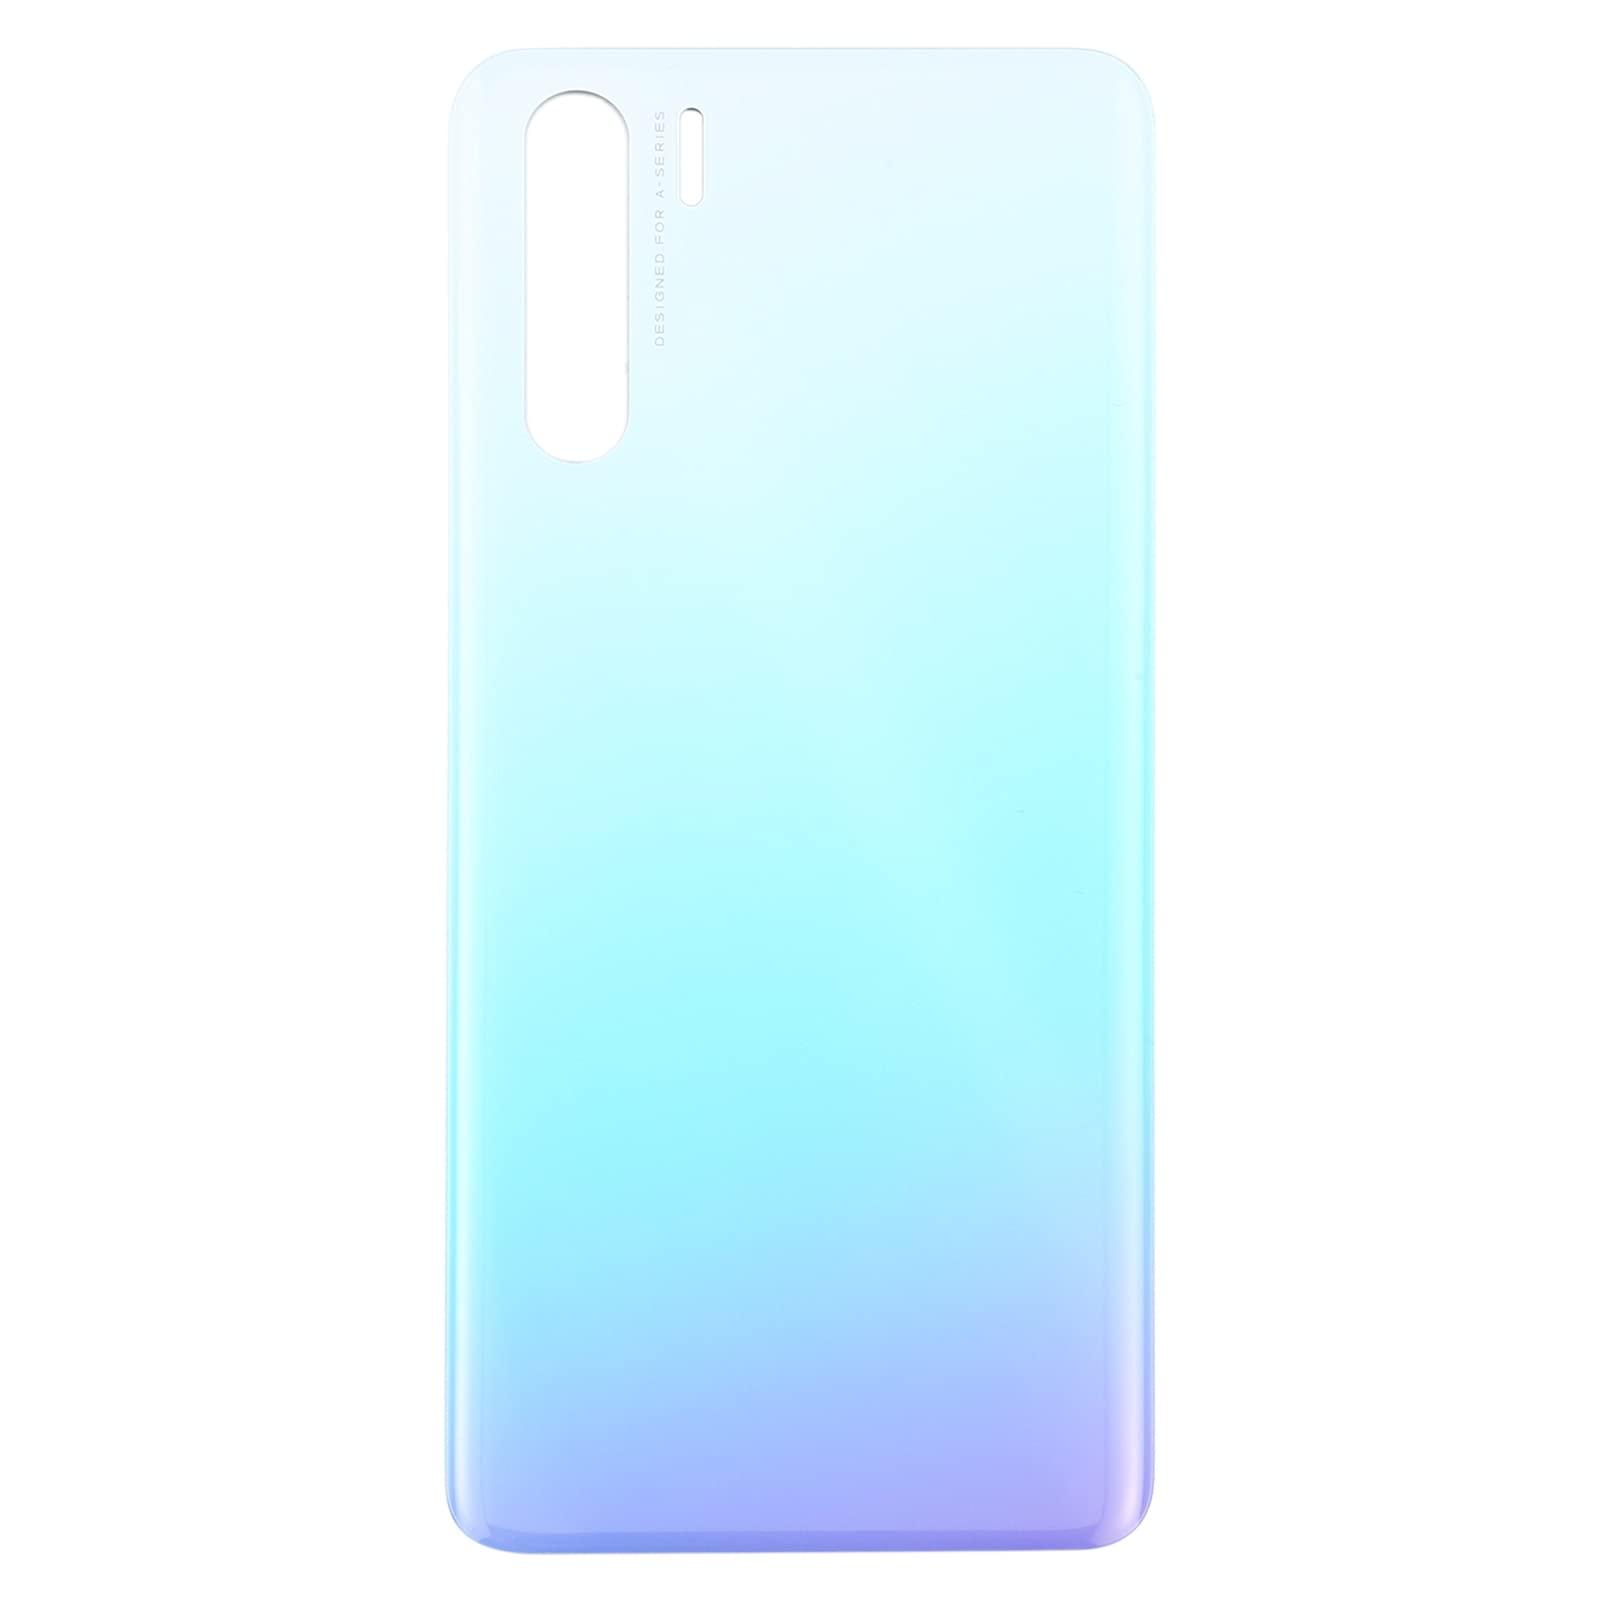 Back Glass Panel for Oppo A91 Baby  Blue